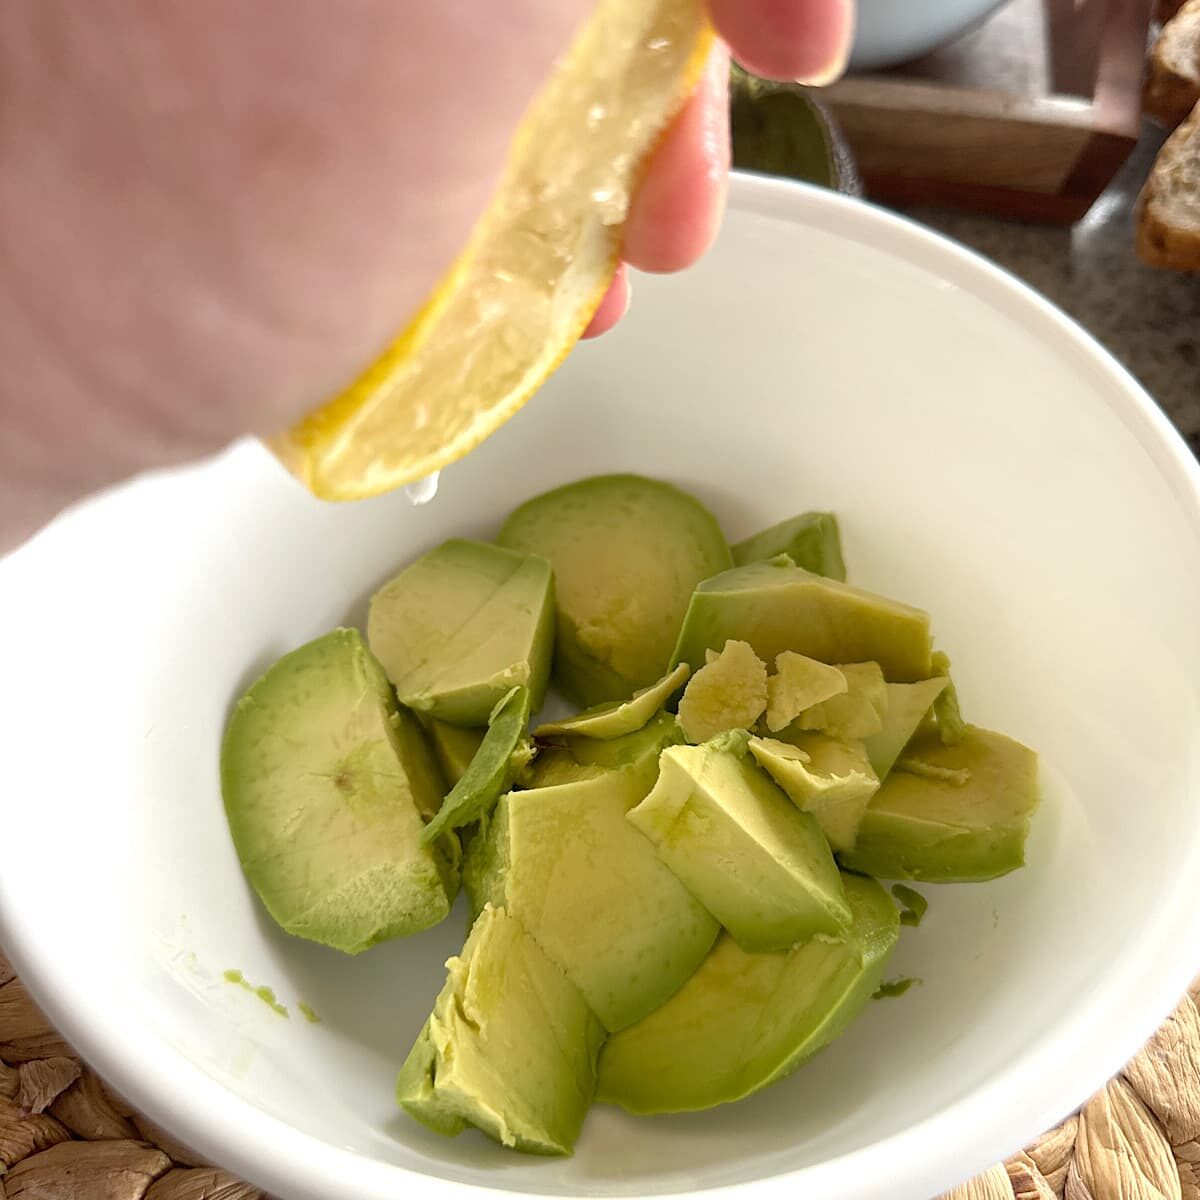 Picture of a bowl of chopped avocado.